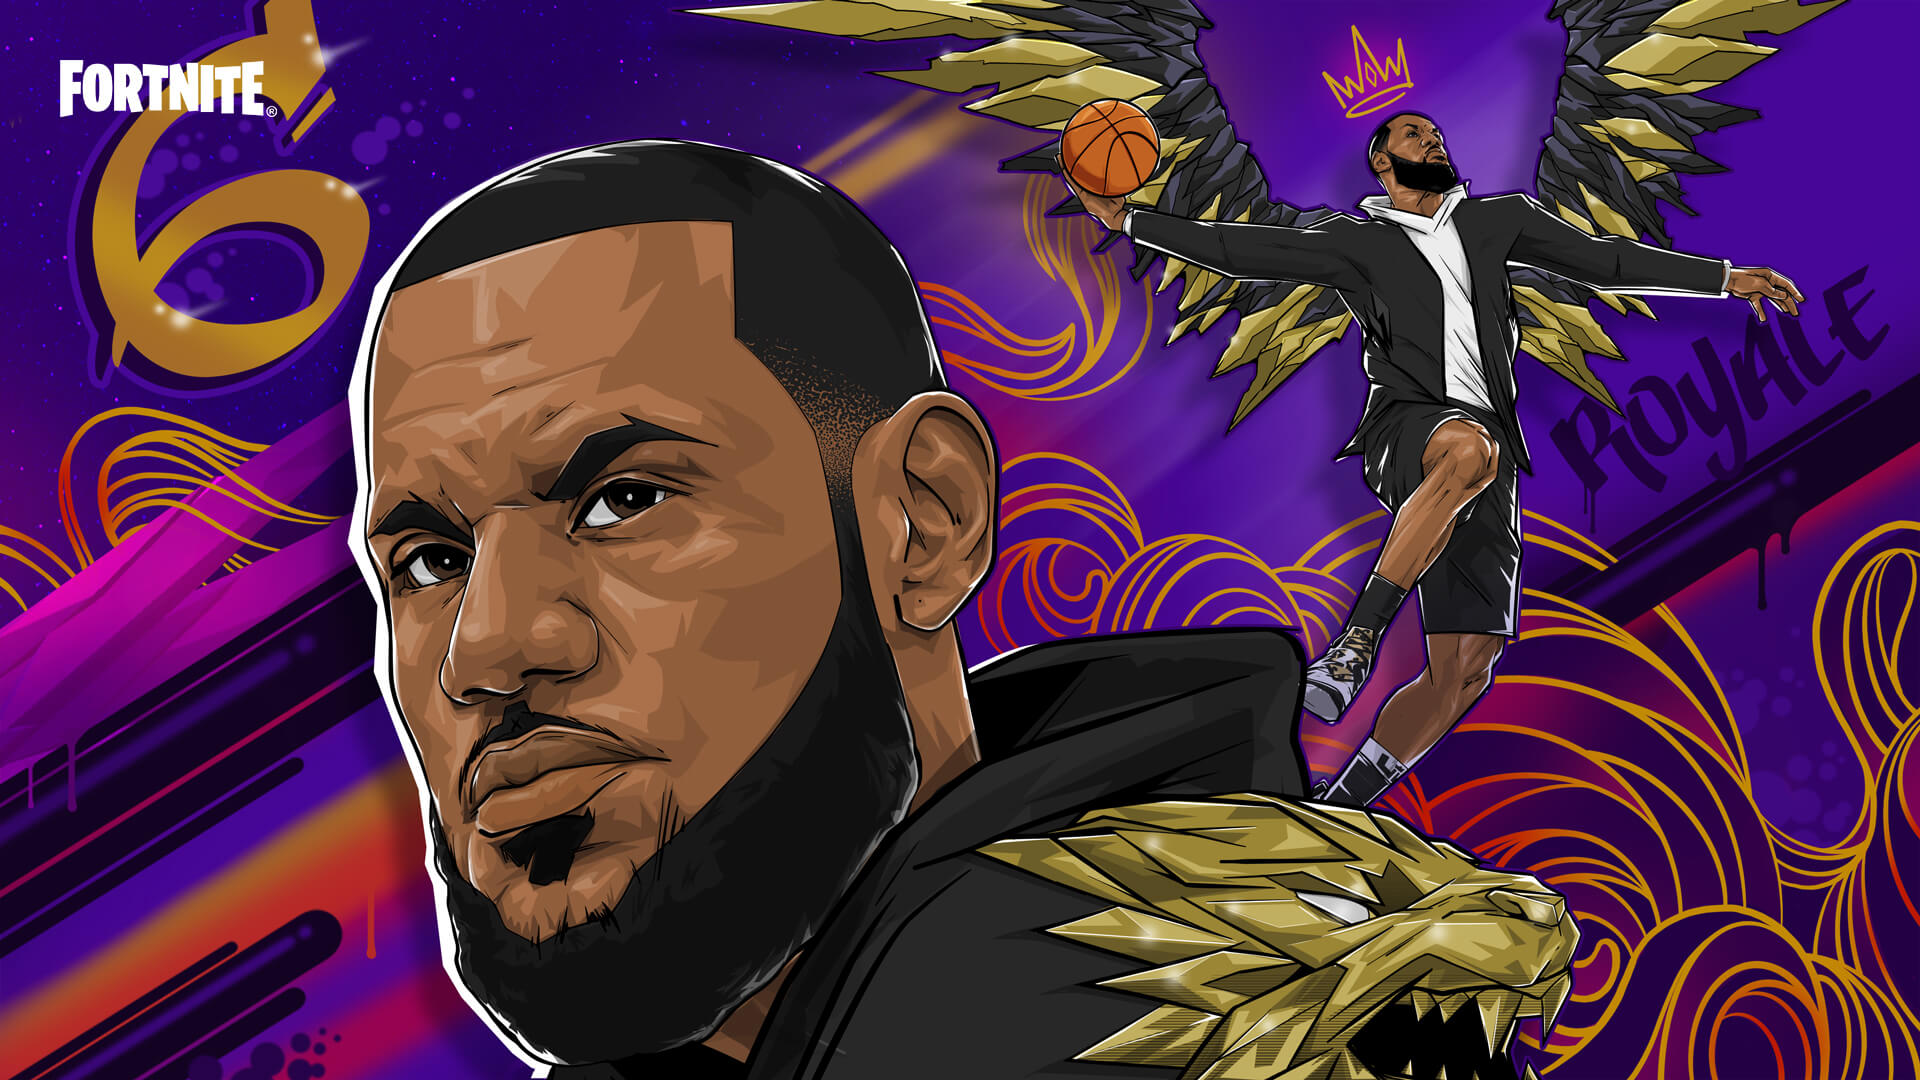 LeBron James joins the Fortnite Icon Series